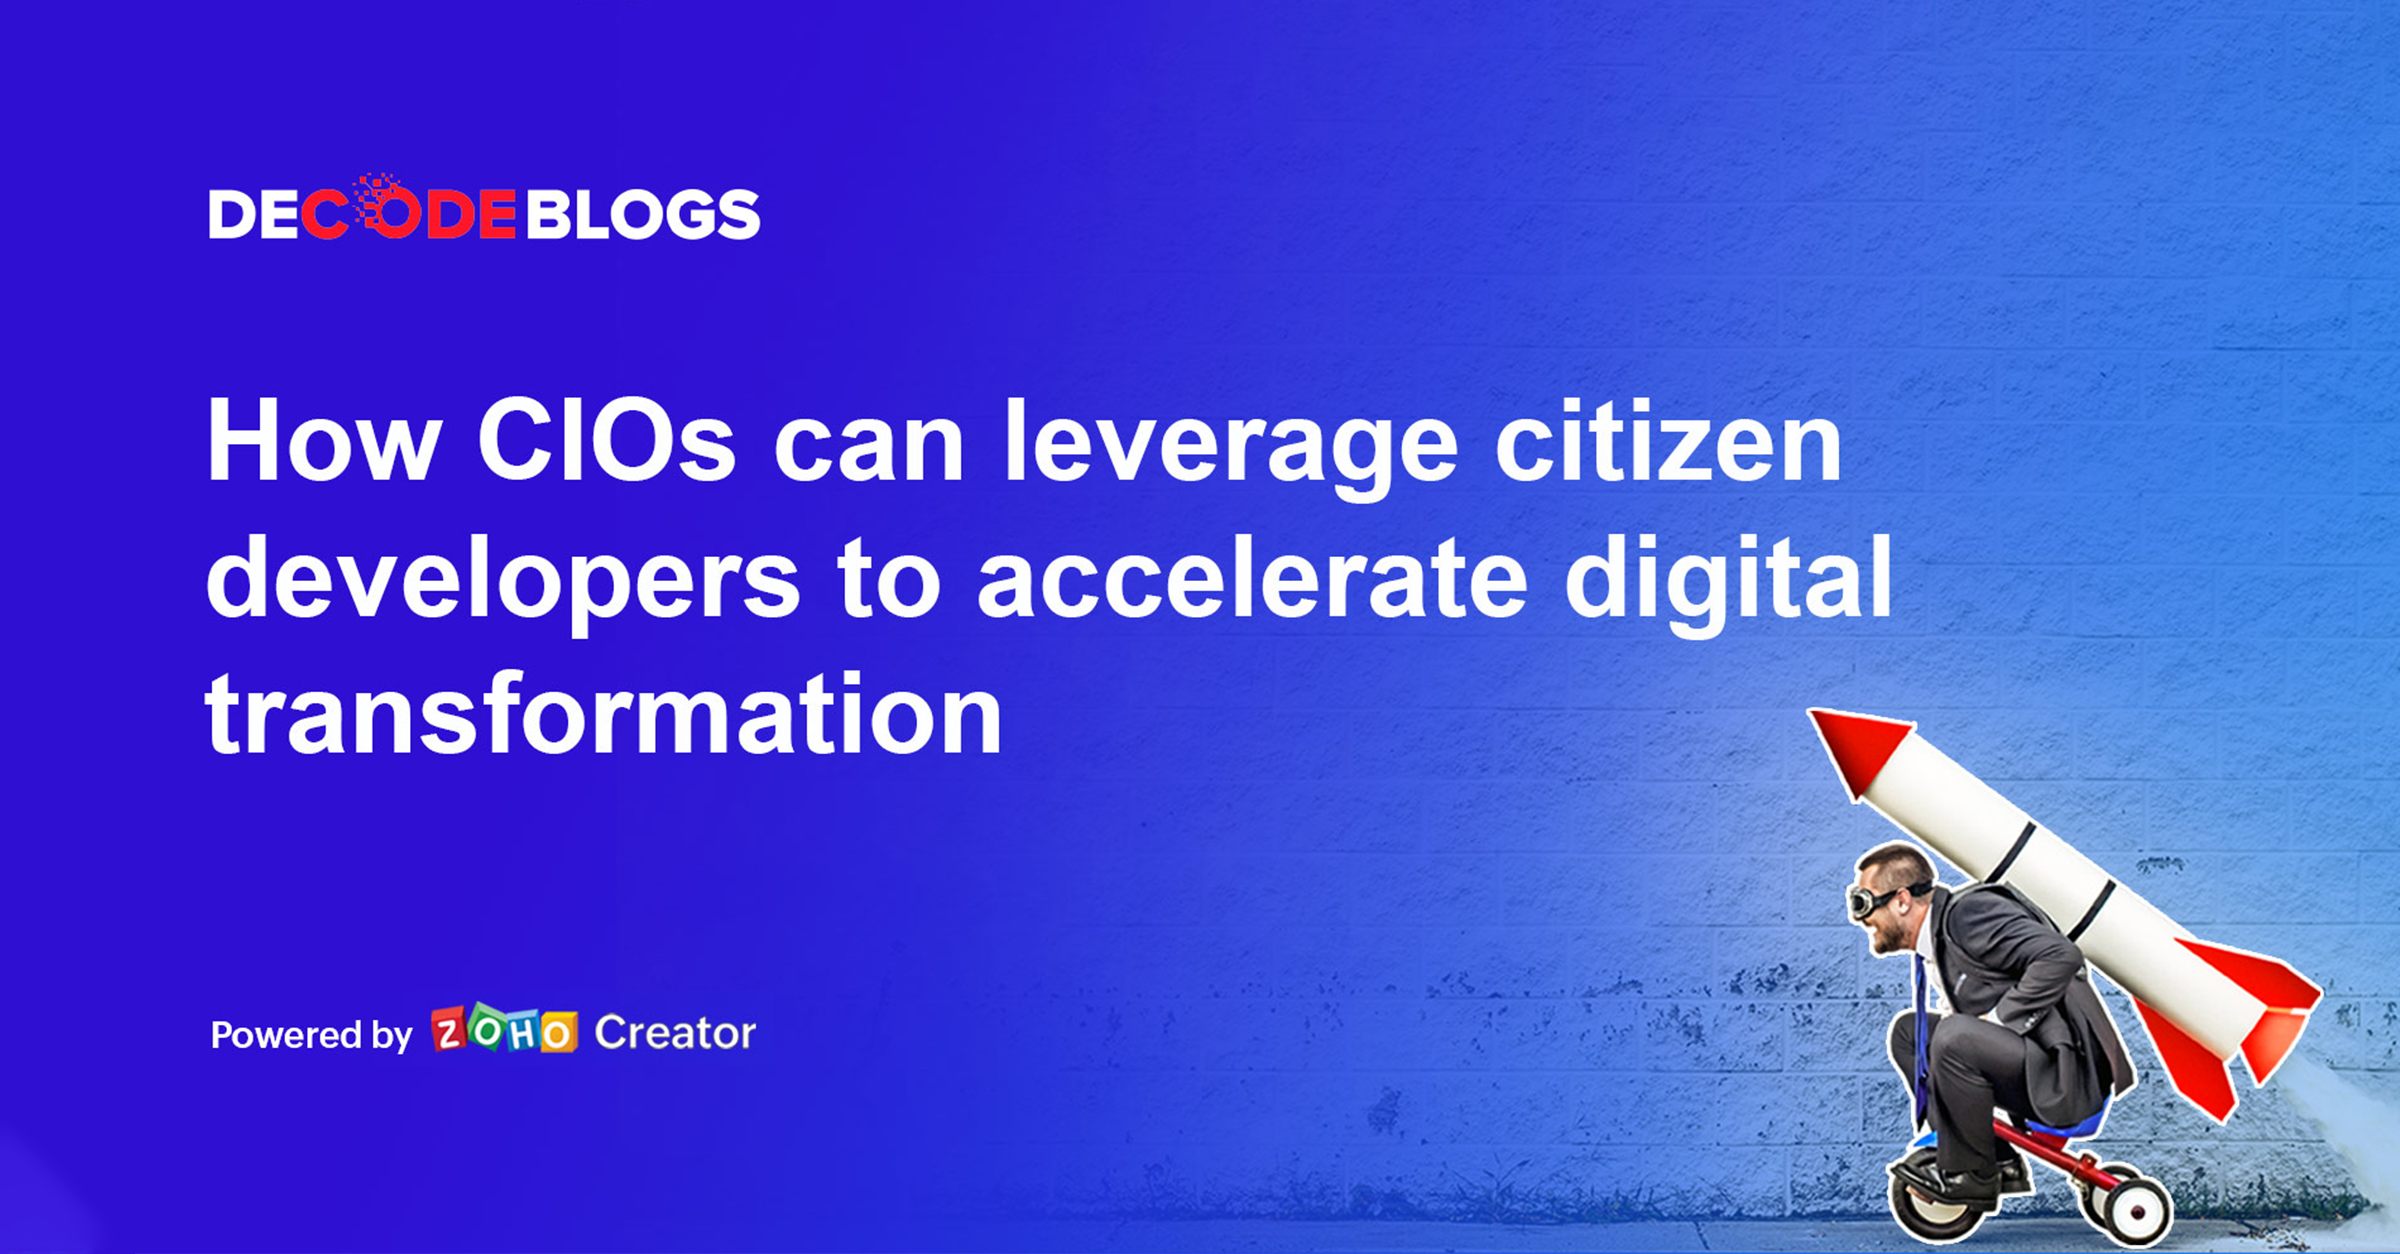 How CIOs can leverage citizen developers to accelerate digital transformation